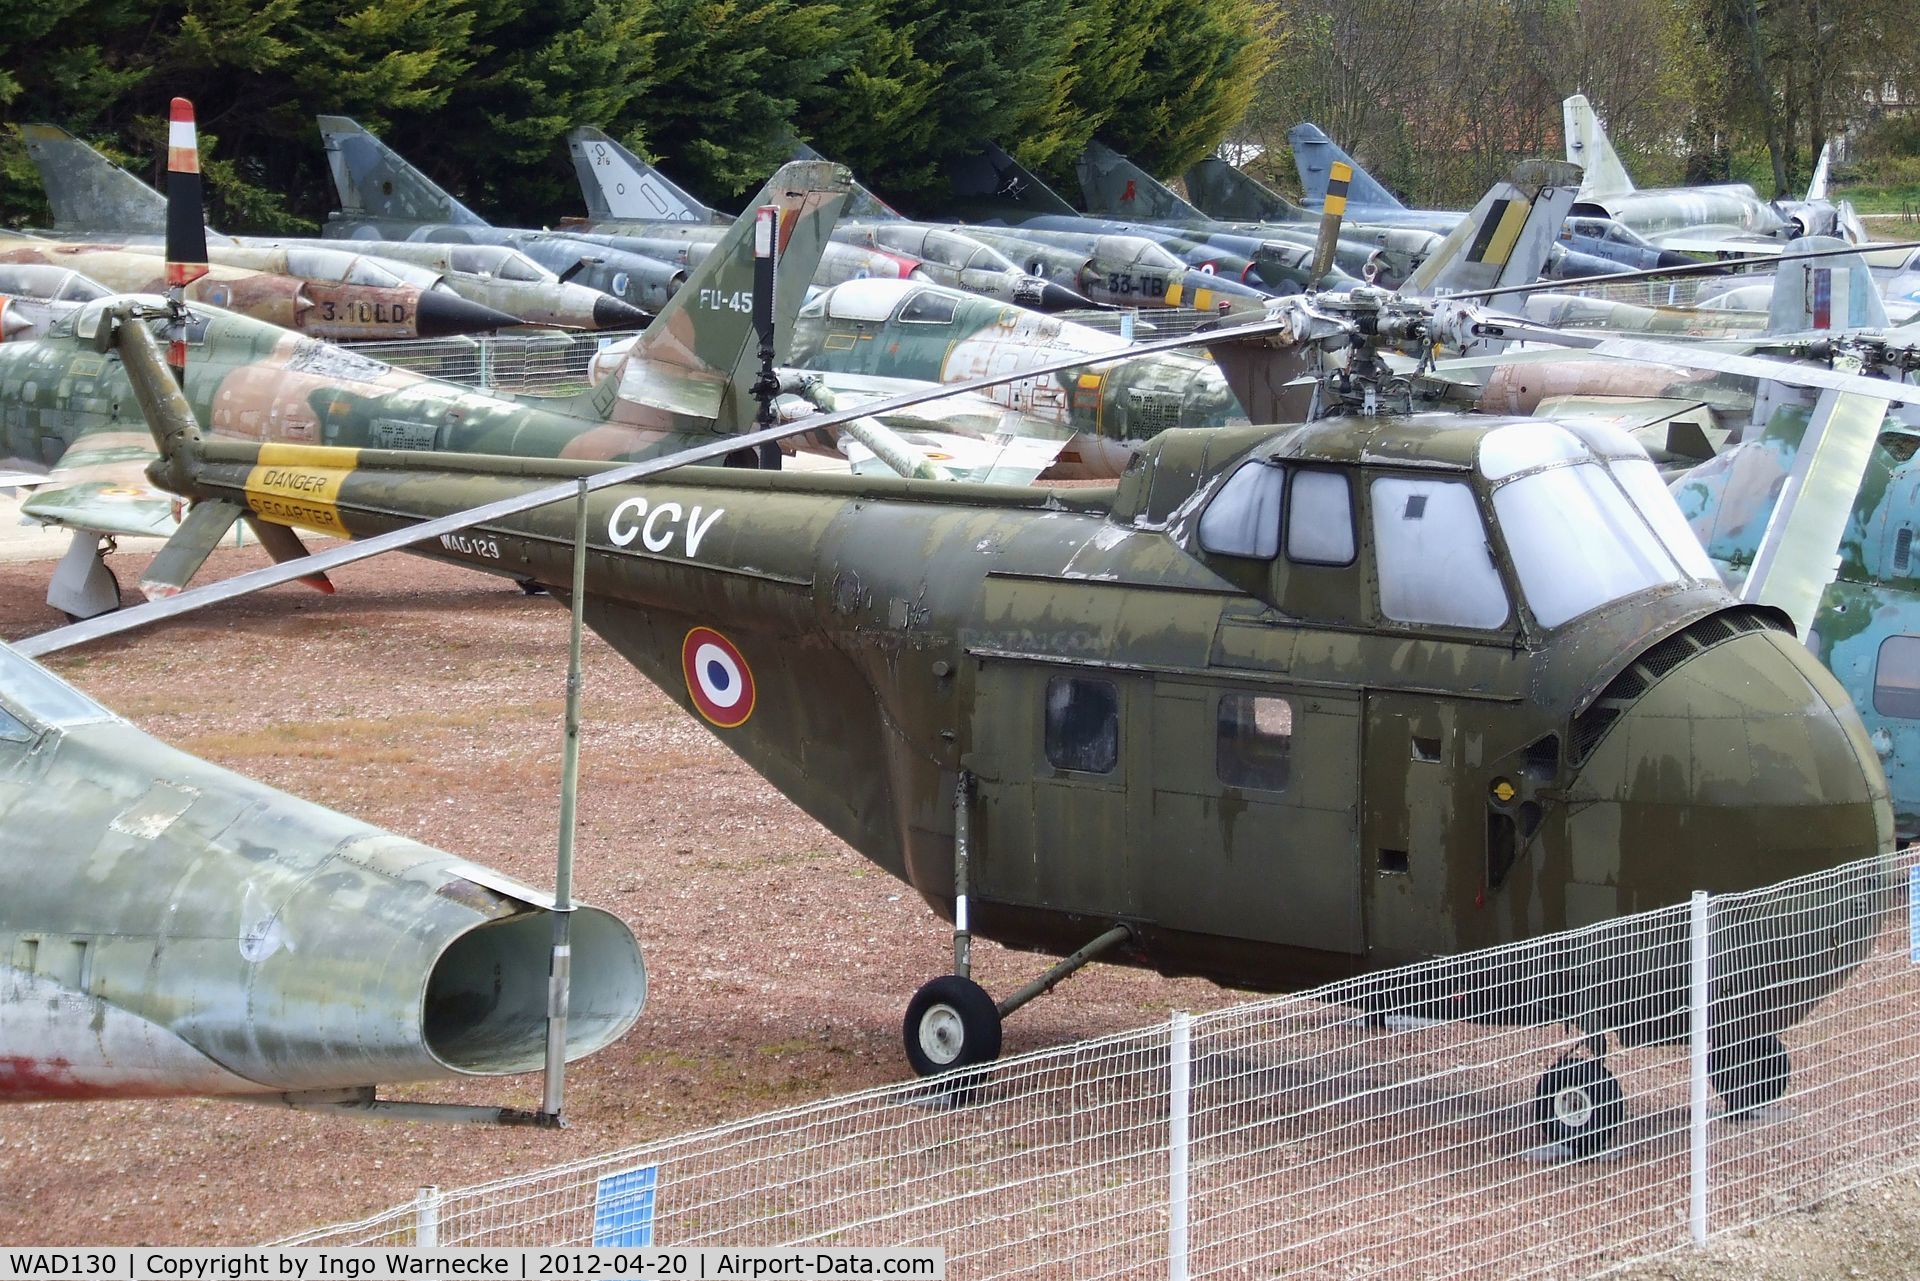 WAD130, Westland S.55 Whirlwind Srs 2 C/N WA138, Westland WS-55 Whirlwind (displayed as 'WAD129') at the Musee de l'Aviation du Chateau, Savigny-les-Beaune